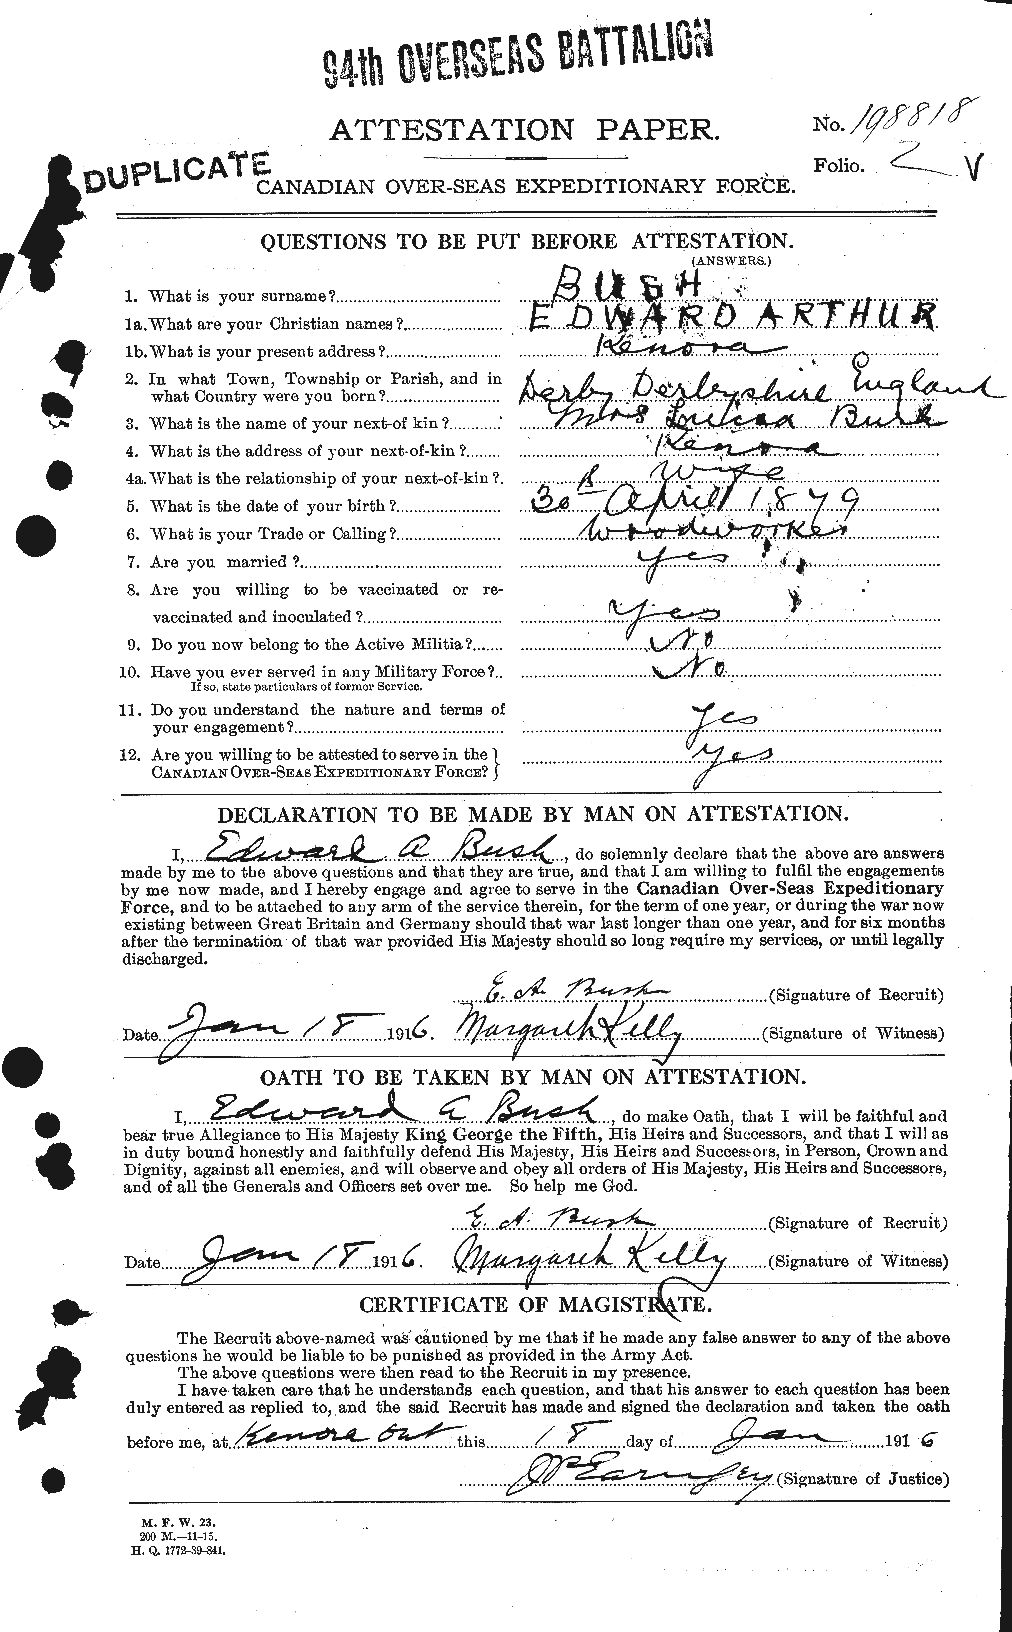 Personnel Records of the First World War - CEF 274355a